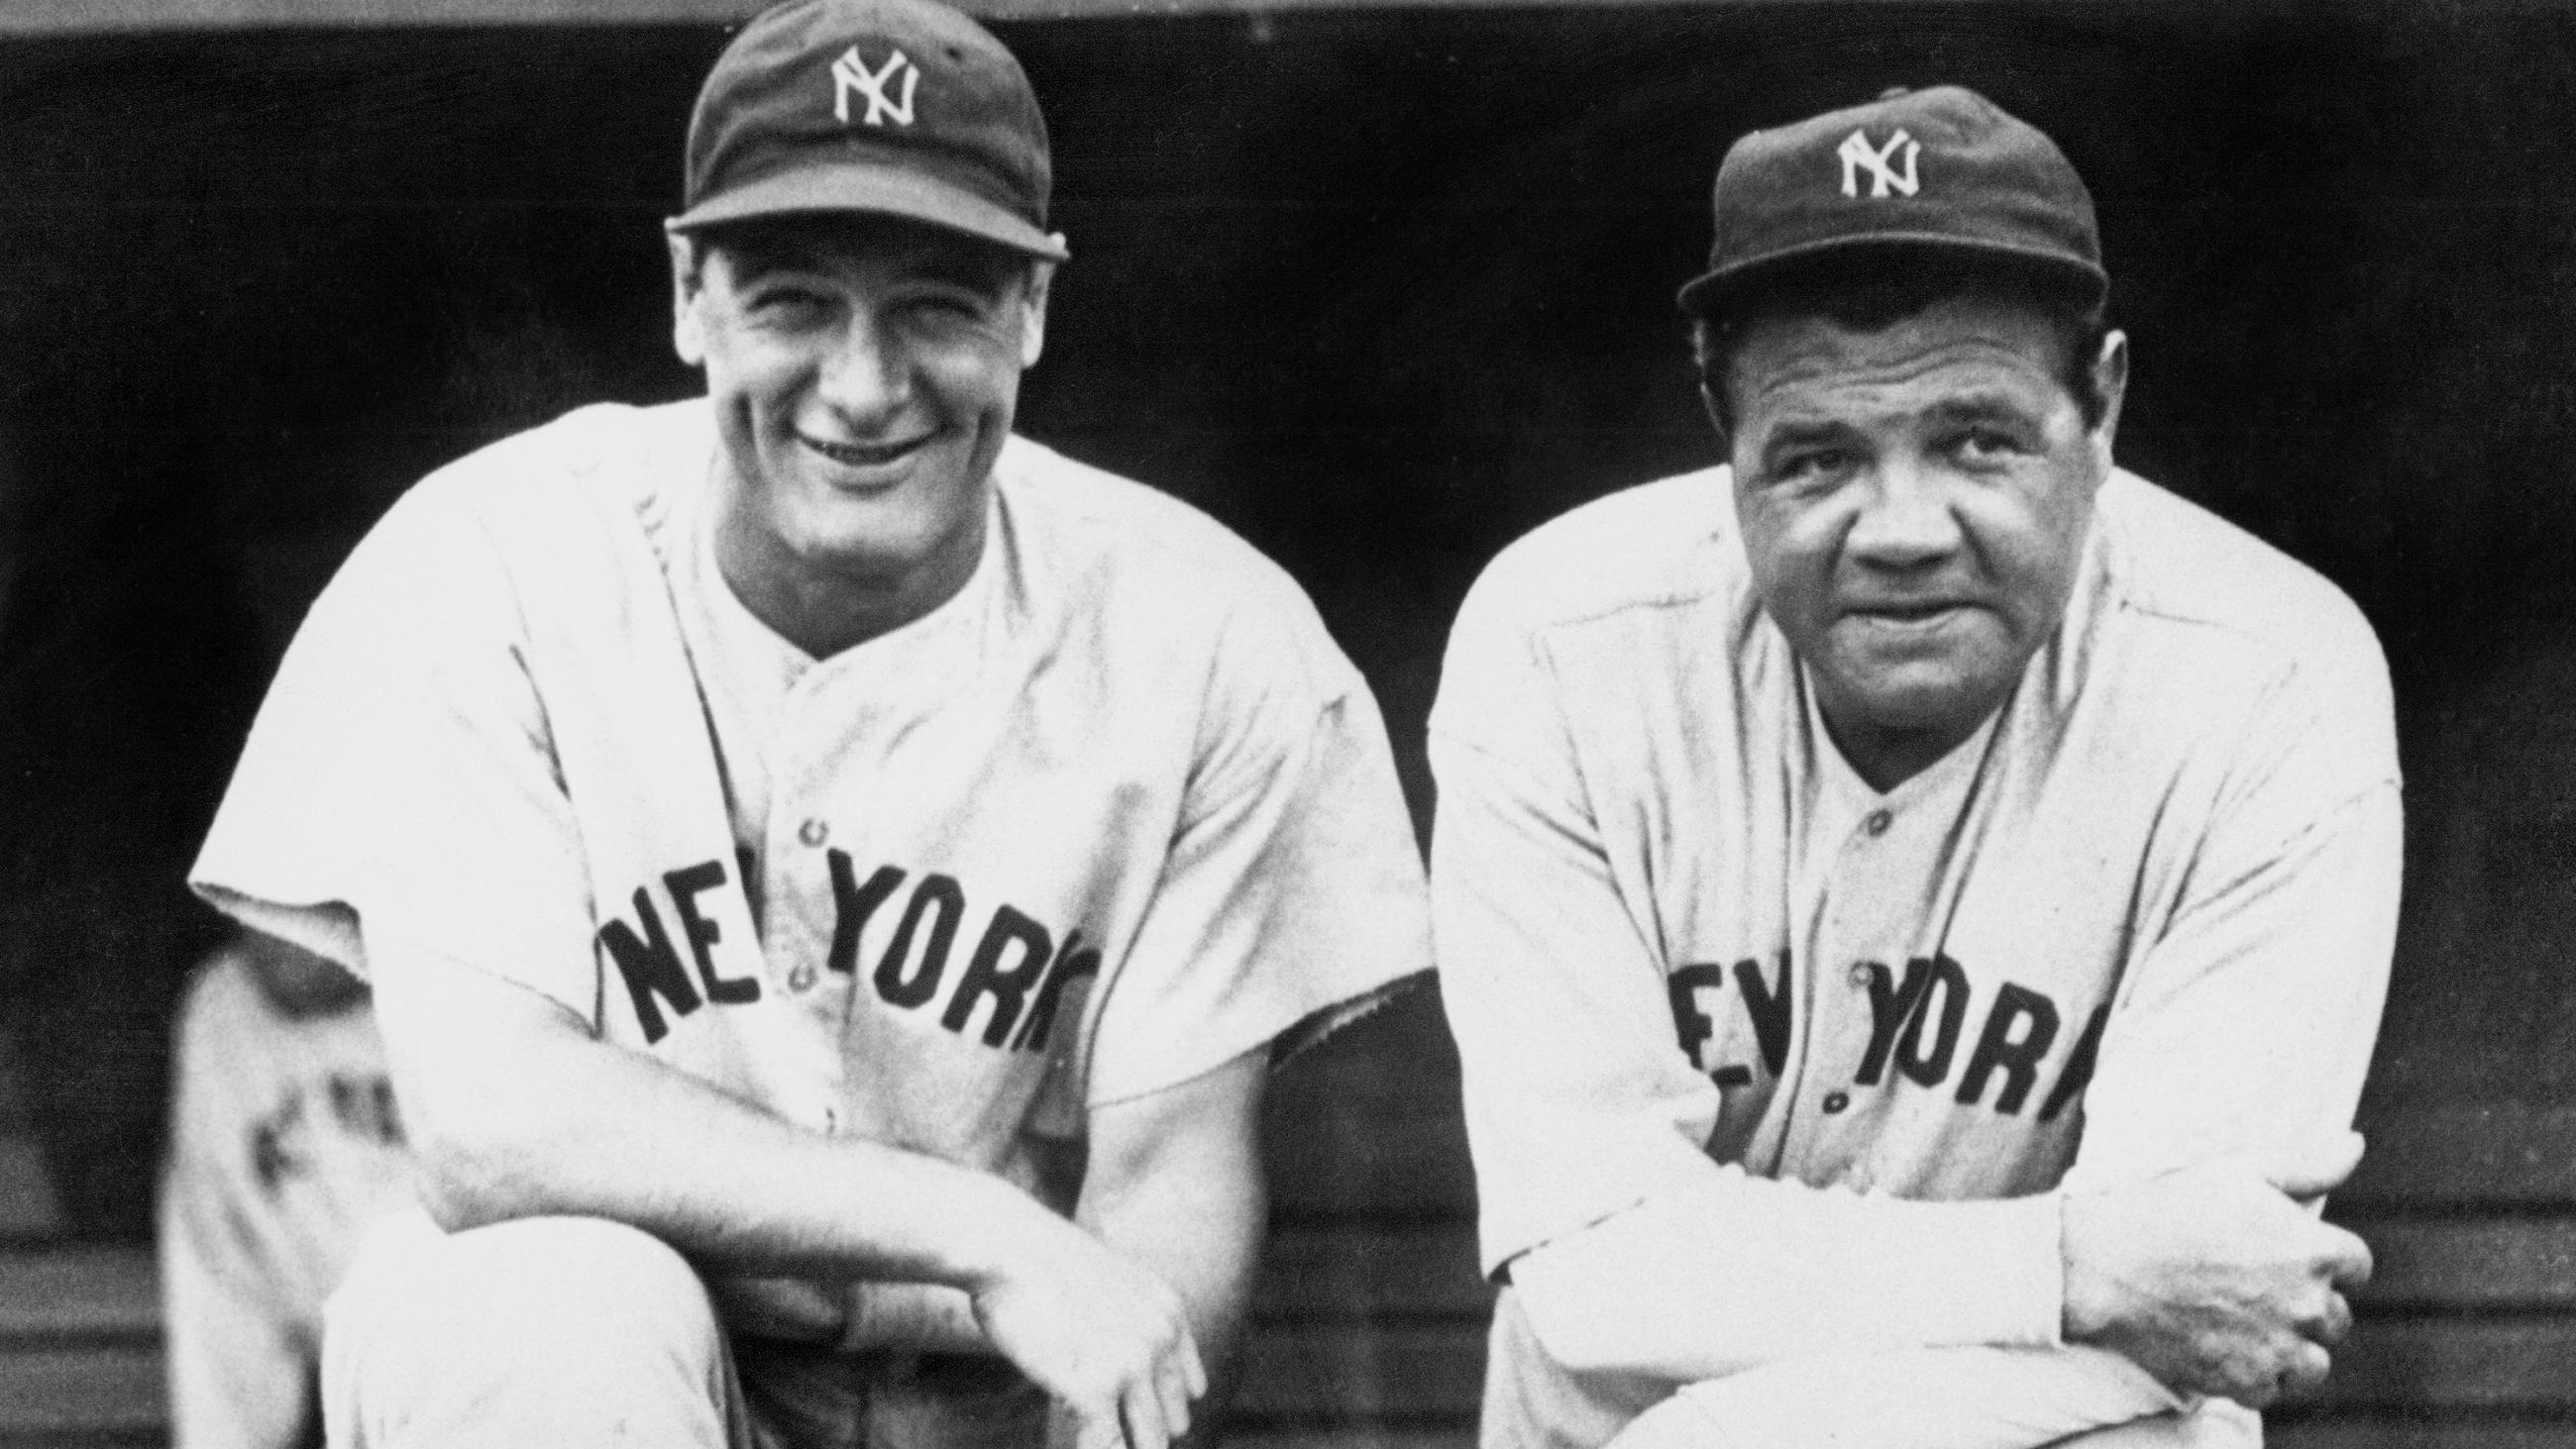 The photo shows Lou Gherig smiling while leaning on one knee propped on a dugout bench next to Babe Ruth.